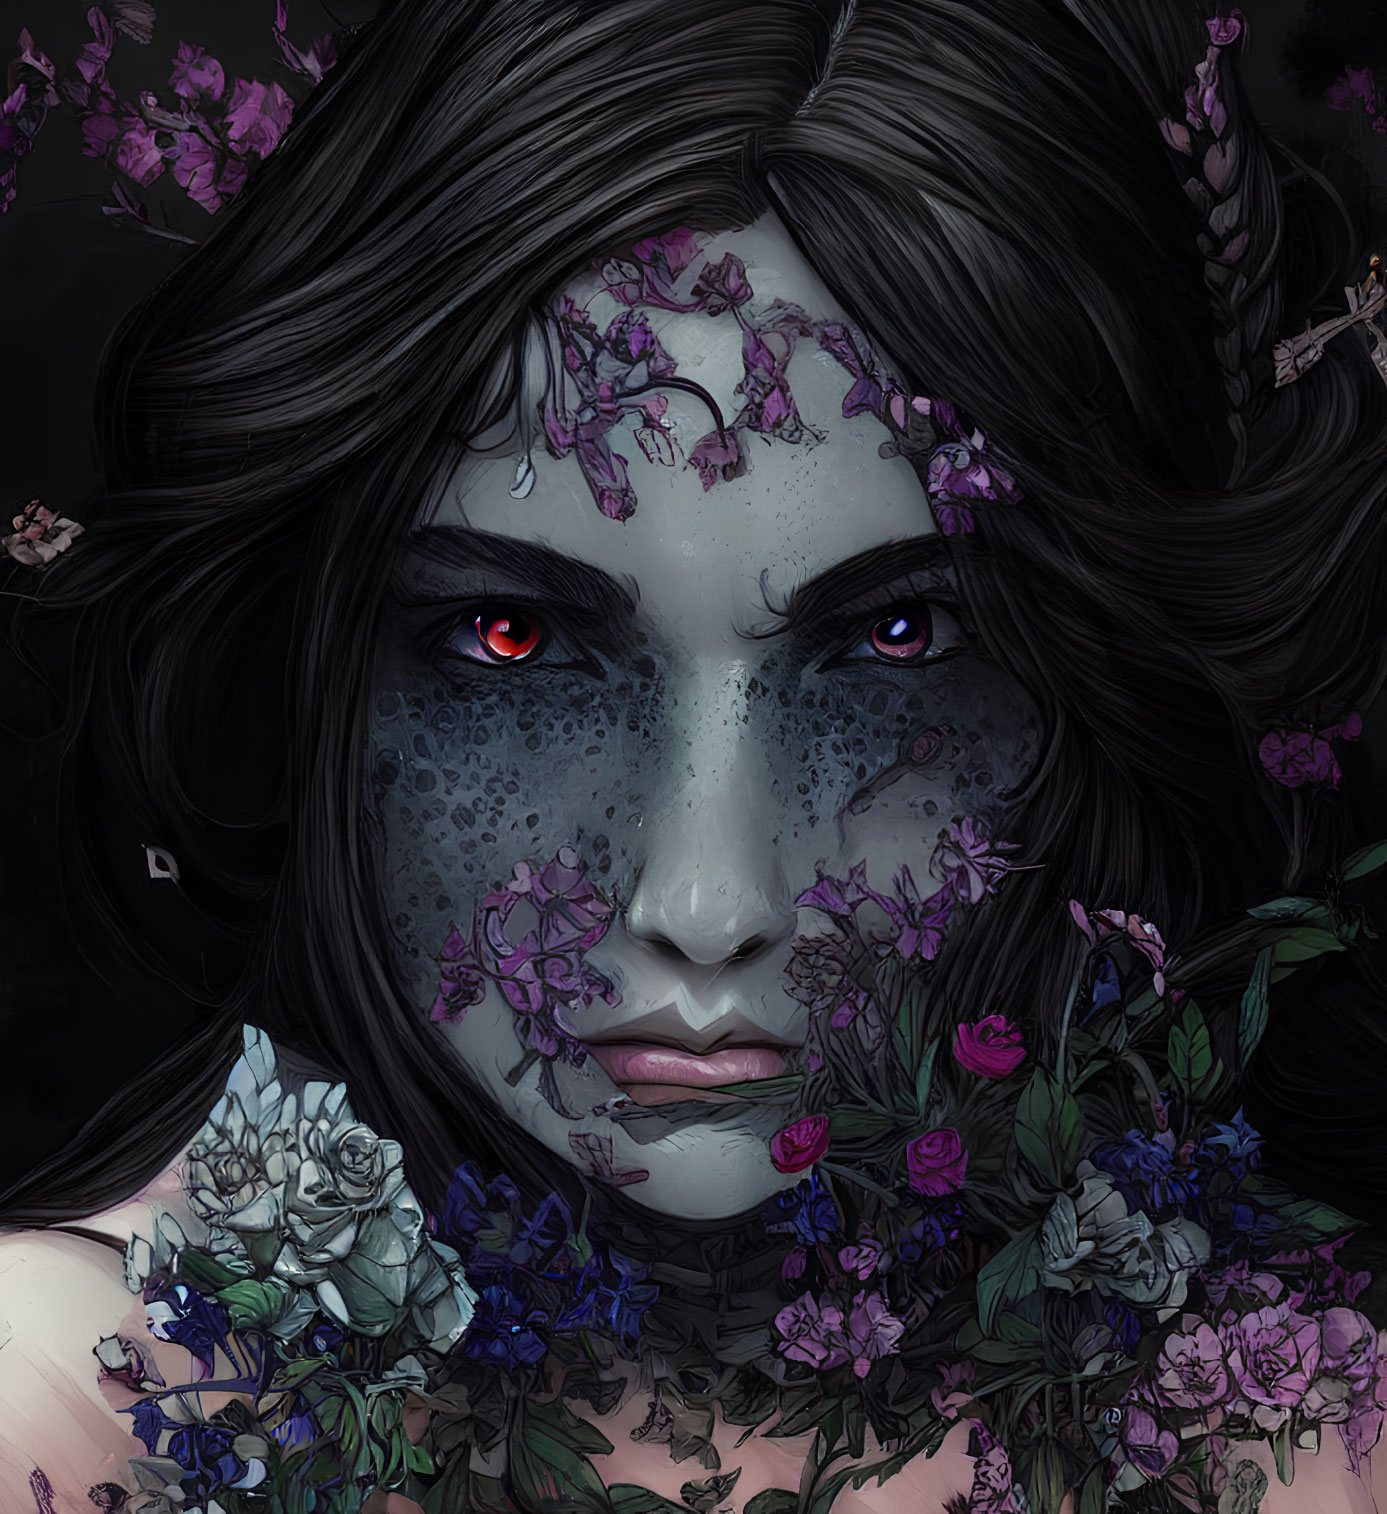 Dark-haired woman with red eyes and floral details in purple setting.